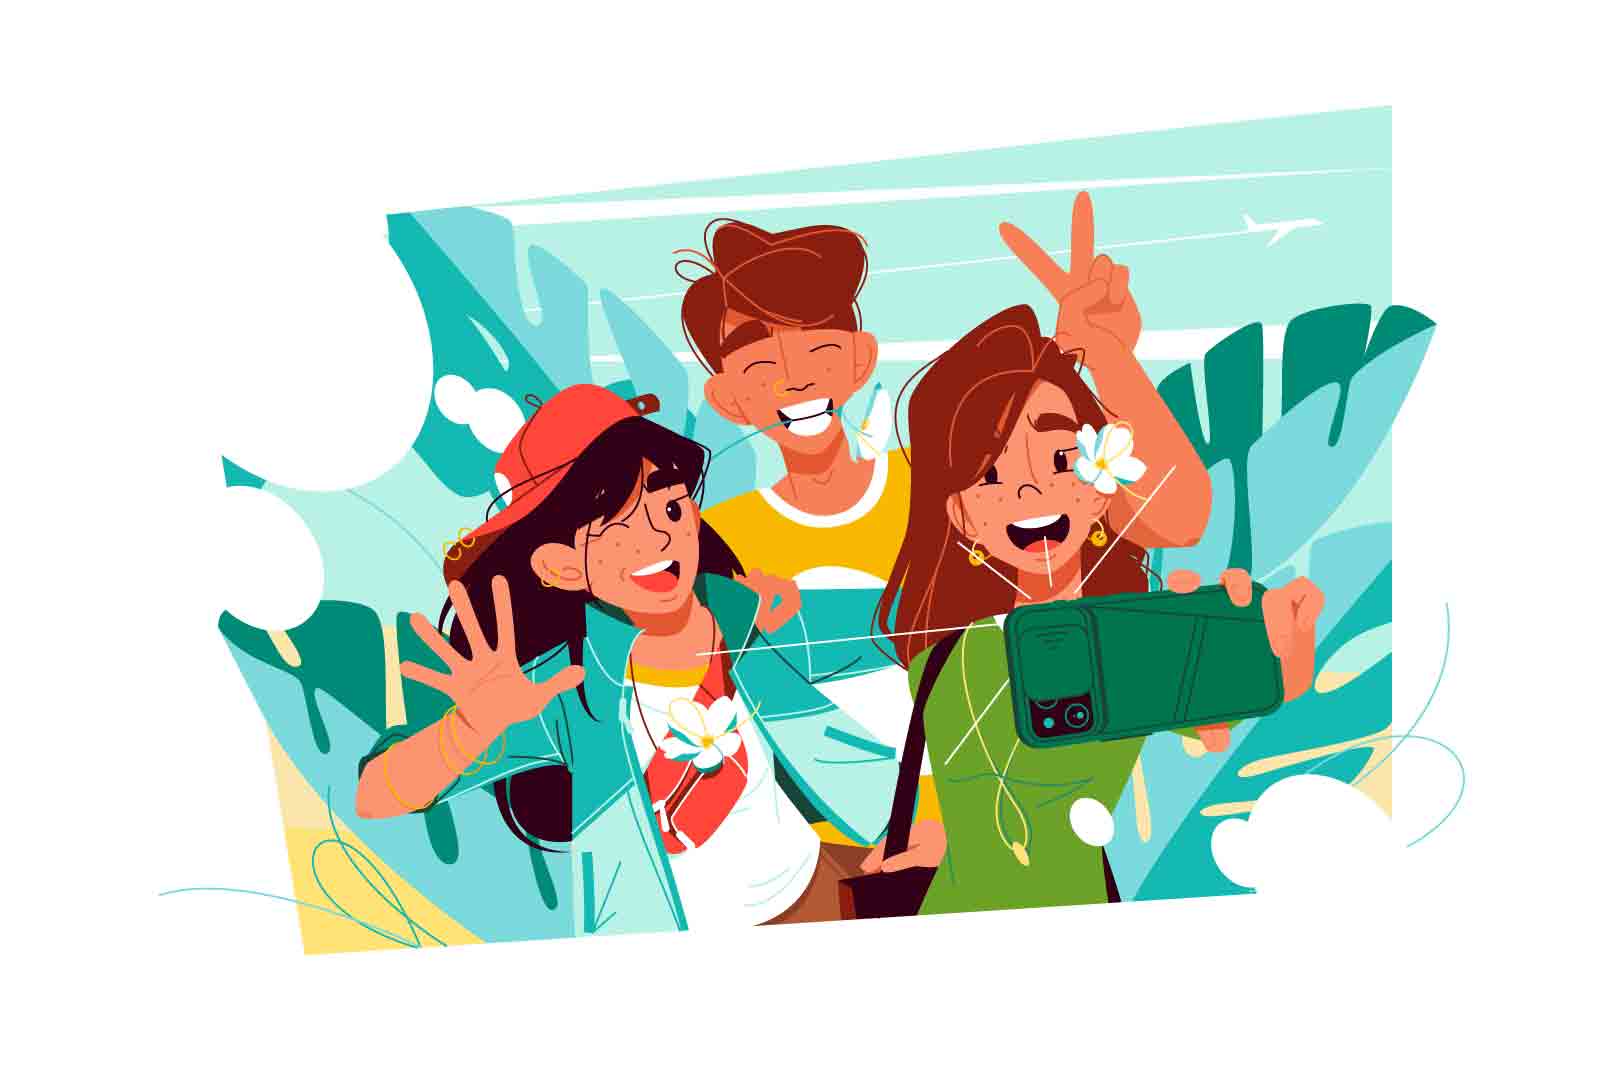 Friends taking selfie on smartphone, capture happy moment vector illustration. Save precious memory, posing for photo. Friendship concept